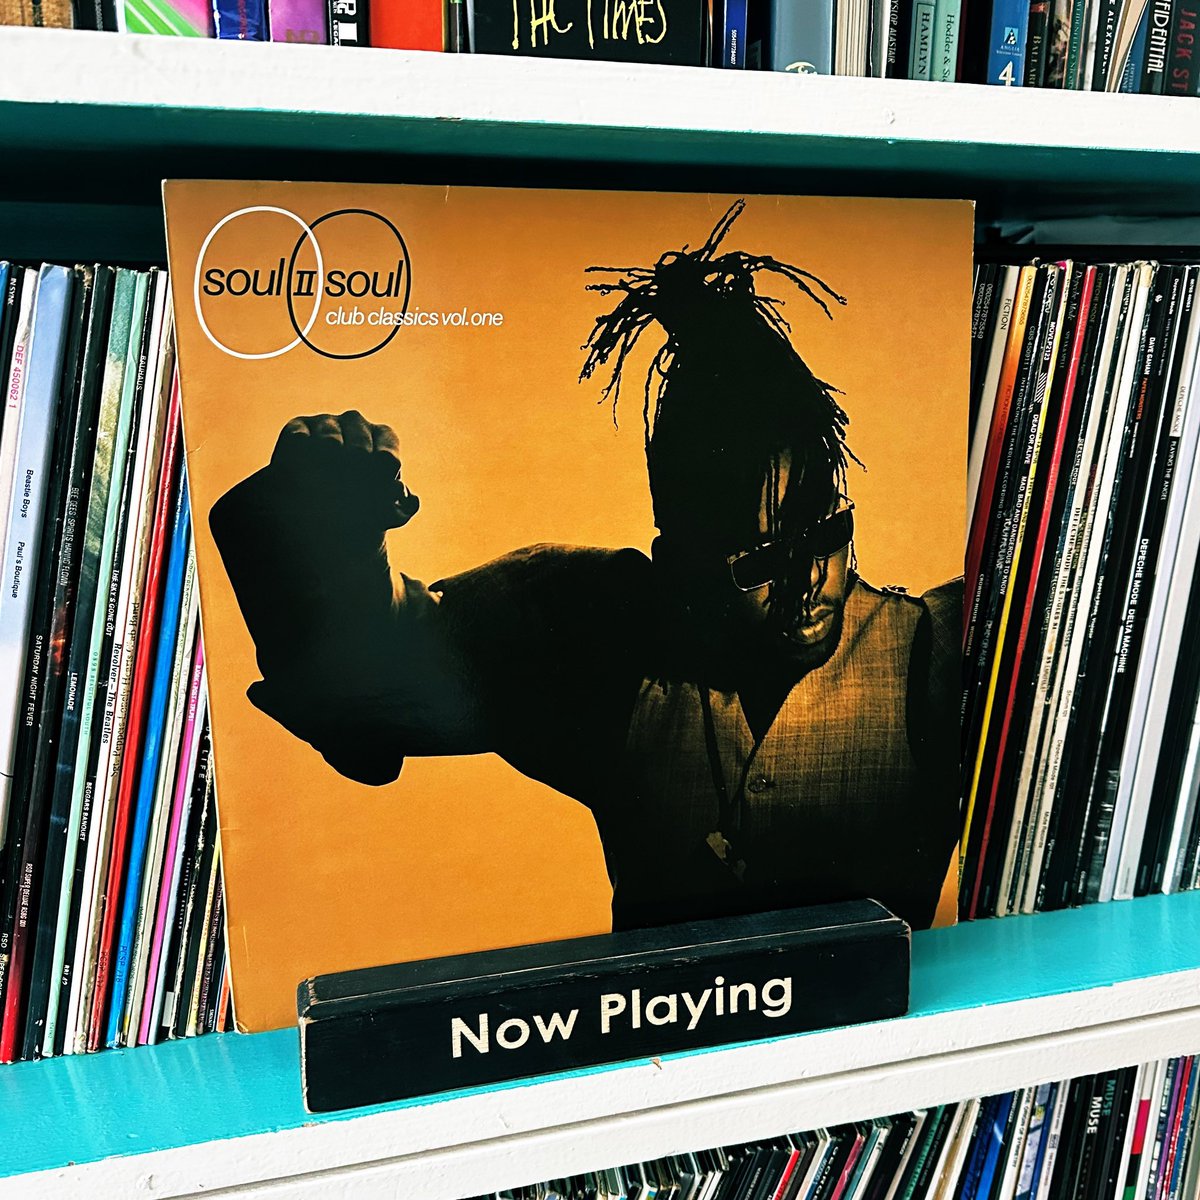 Soul II Soul – Club Classics Vol One dropped April 10th, 1989. Seems like a decent reason to bump the entire thing ALL DAY. And, if you fancy a little know-ledge, I caught up with @JazzieB for this track-by-track breakdown in 2013 for @futuremusicmag: musicradar.com/news/tech/jazz…